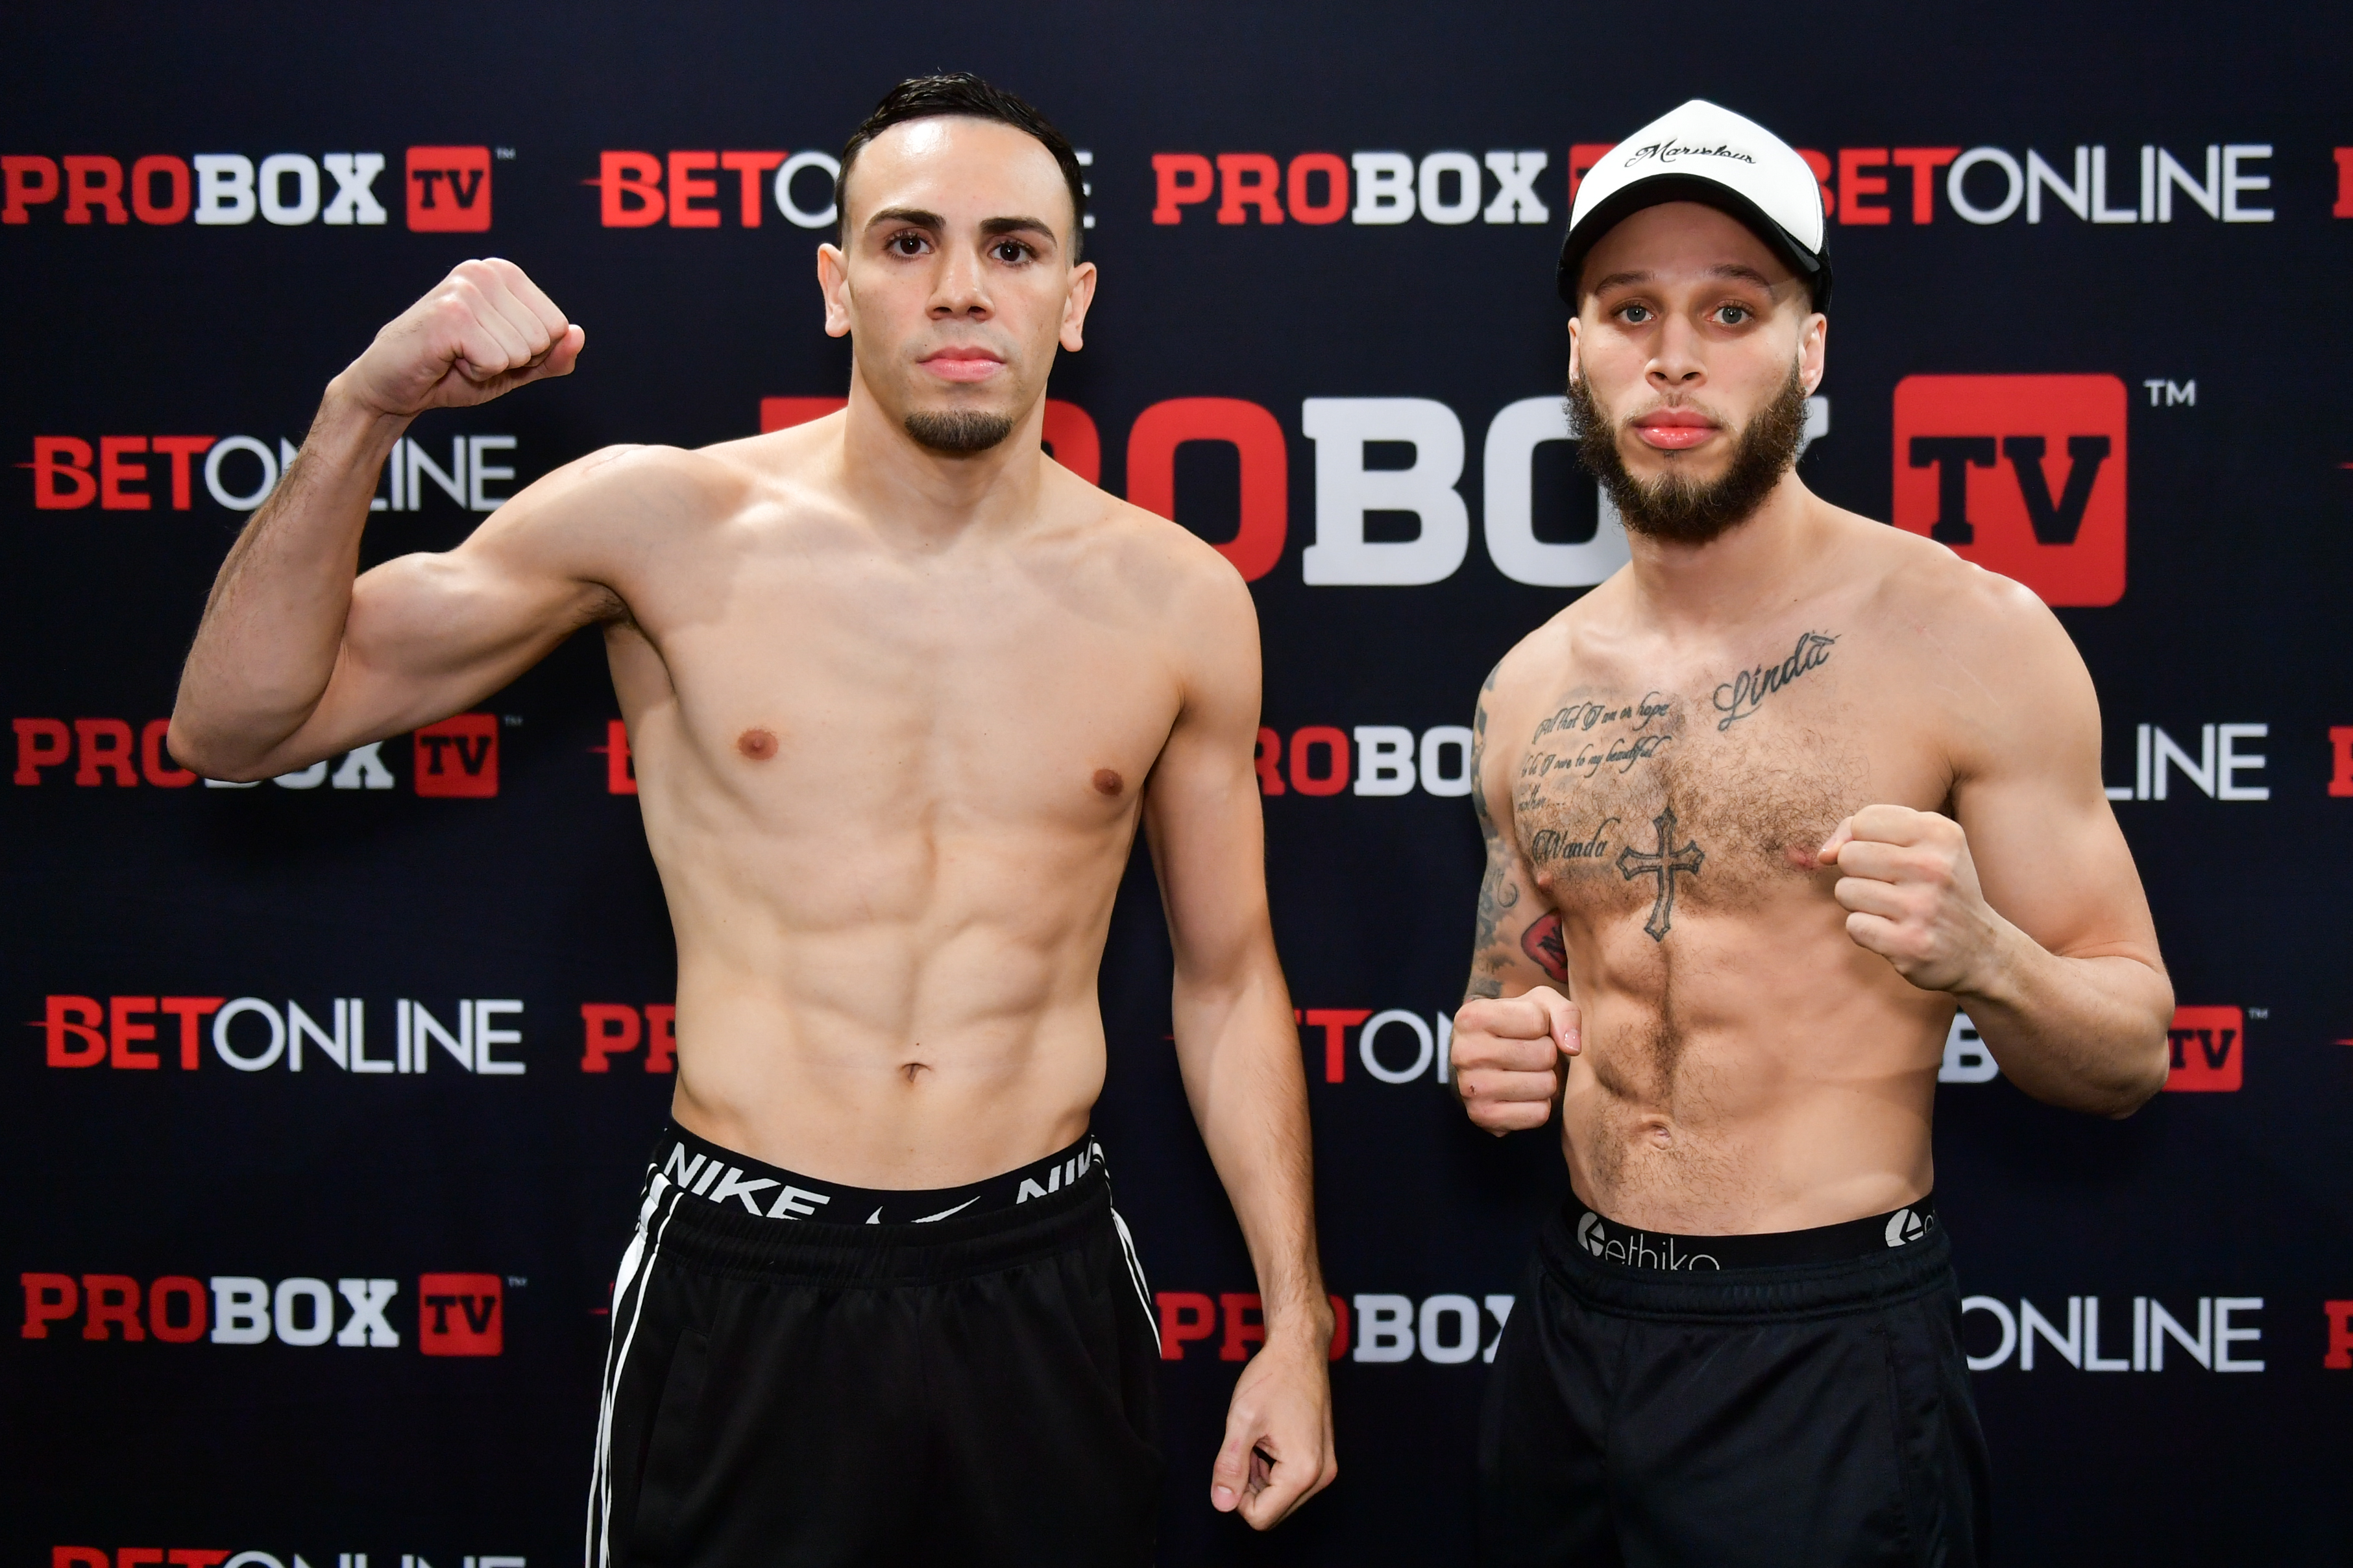 Feliciano vs. Williams: Weigh-In Results & Betting Odds